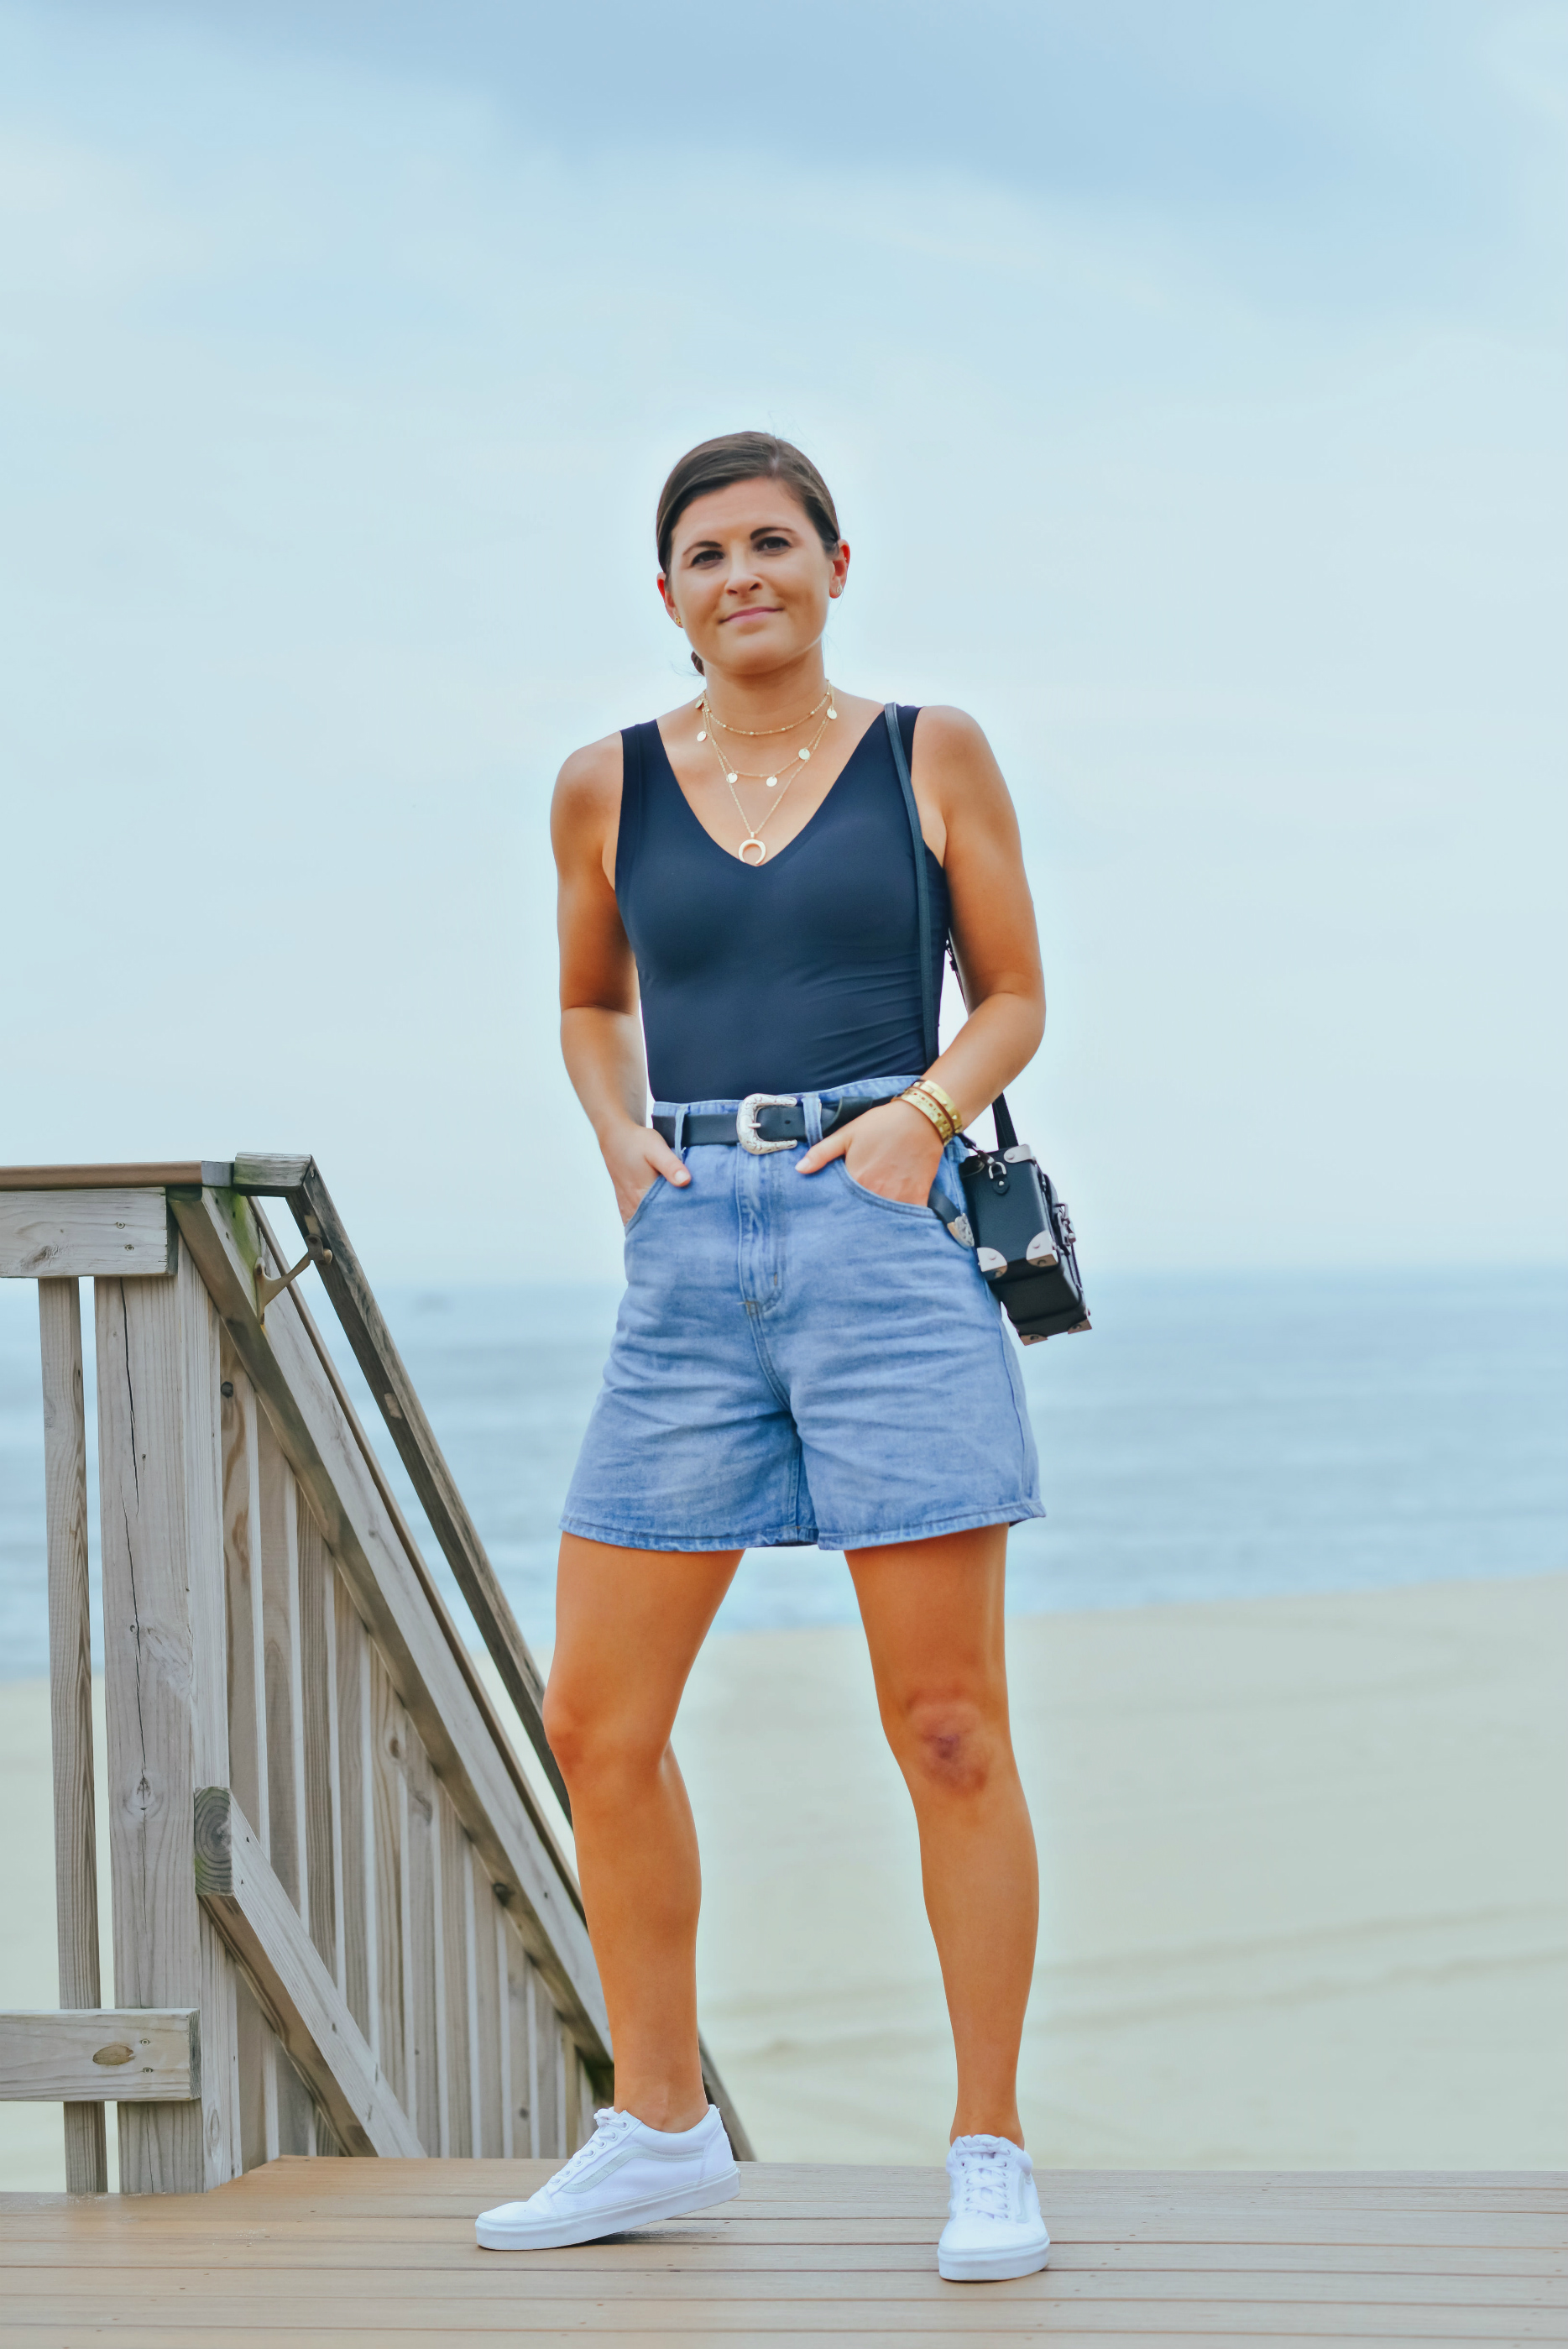 PrettyLittleThing High Waisted Mom Jean Denim Shorts, Dorina Black Seamless Bodysuit, Vans Classic Old Skool Triple White Sneakers, Denim Shorts Outfit, How to Wear Denim Shorts as an Adult, Tilden of To Be Bright